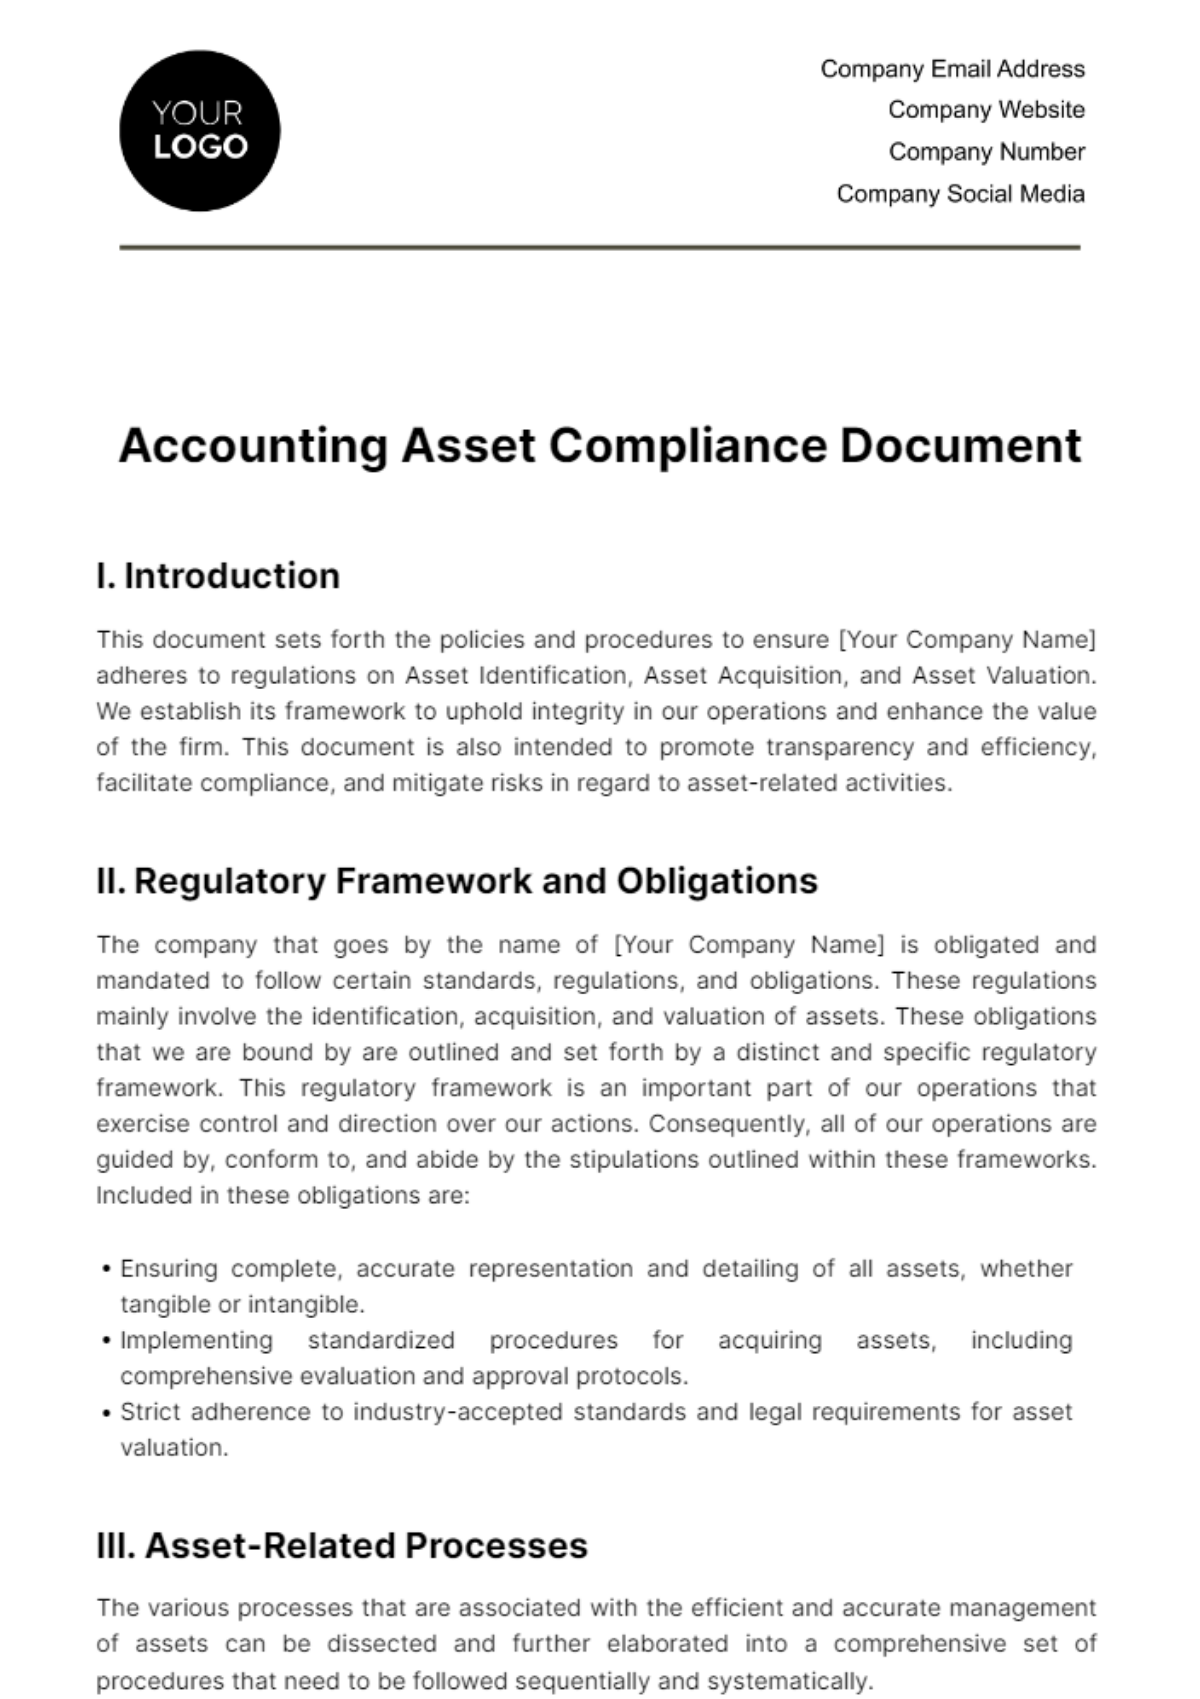 Free Accounting Asset Compliance Document Template